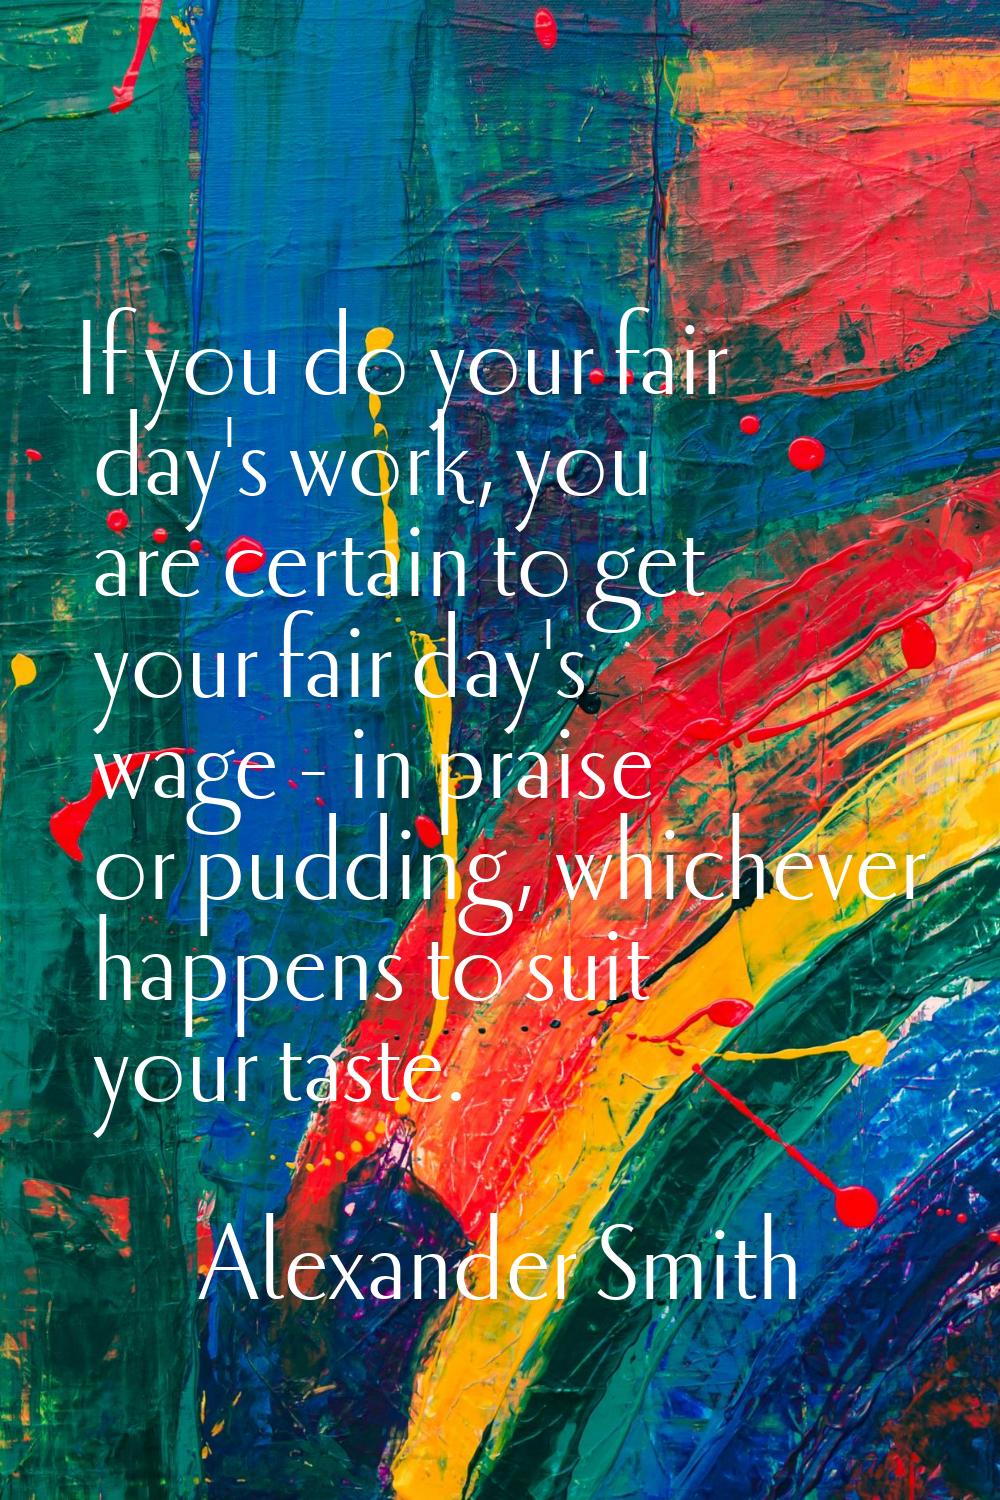 If you do your fair day's work, you are certain to get your fair day's wage - in praise or pudding,